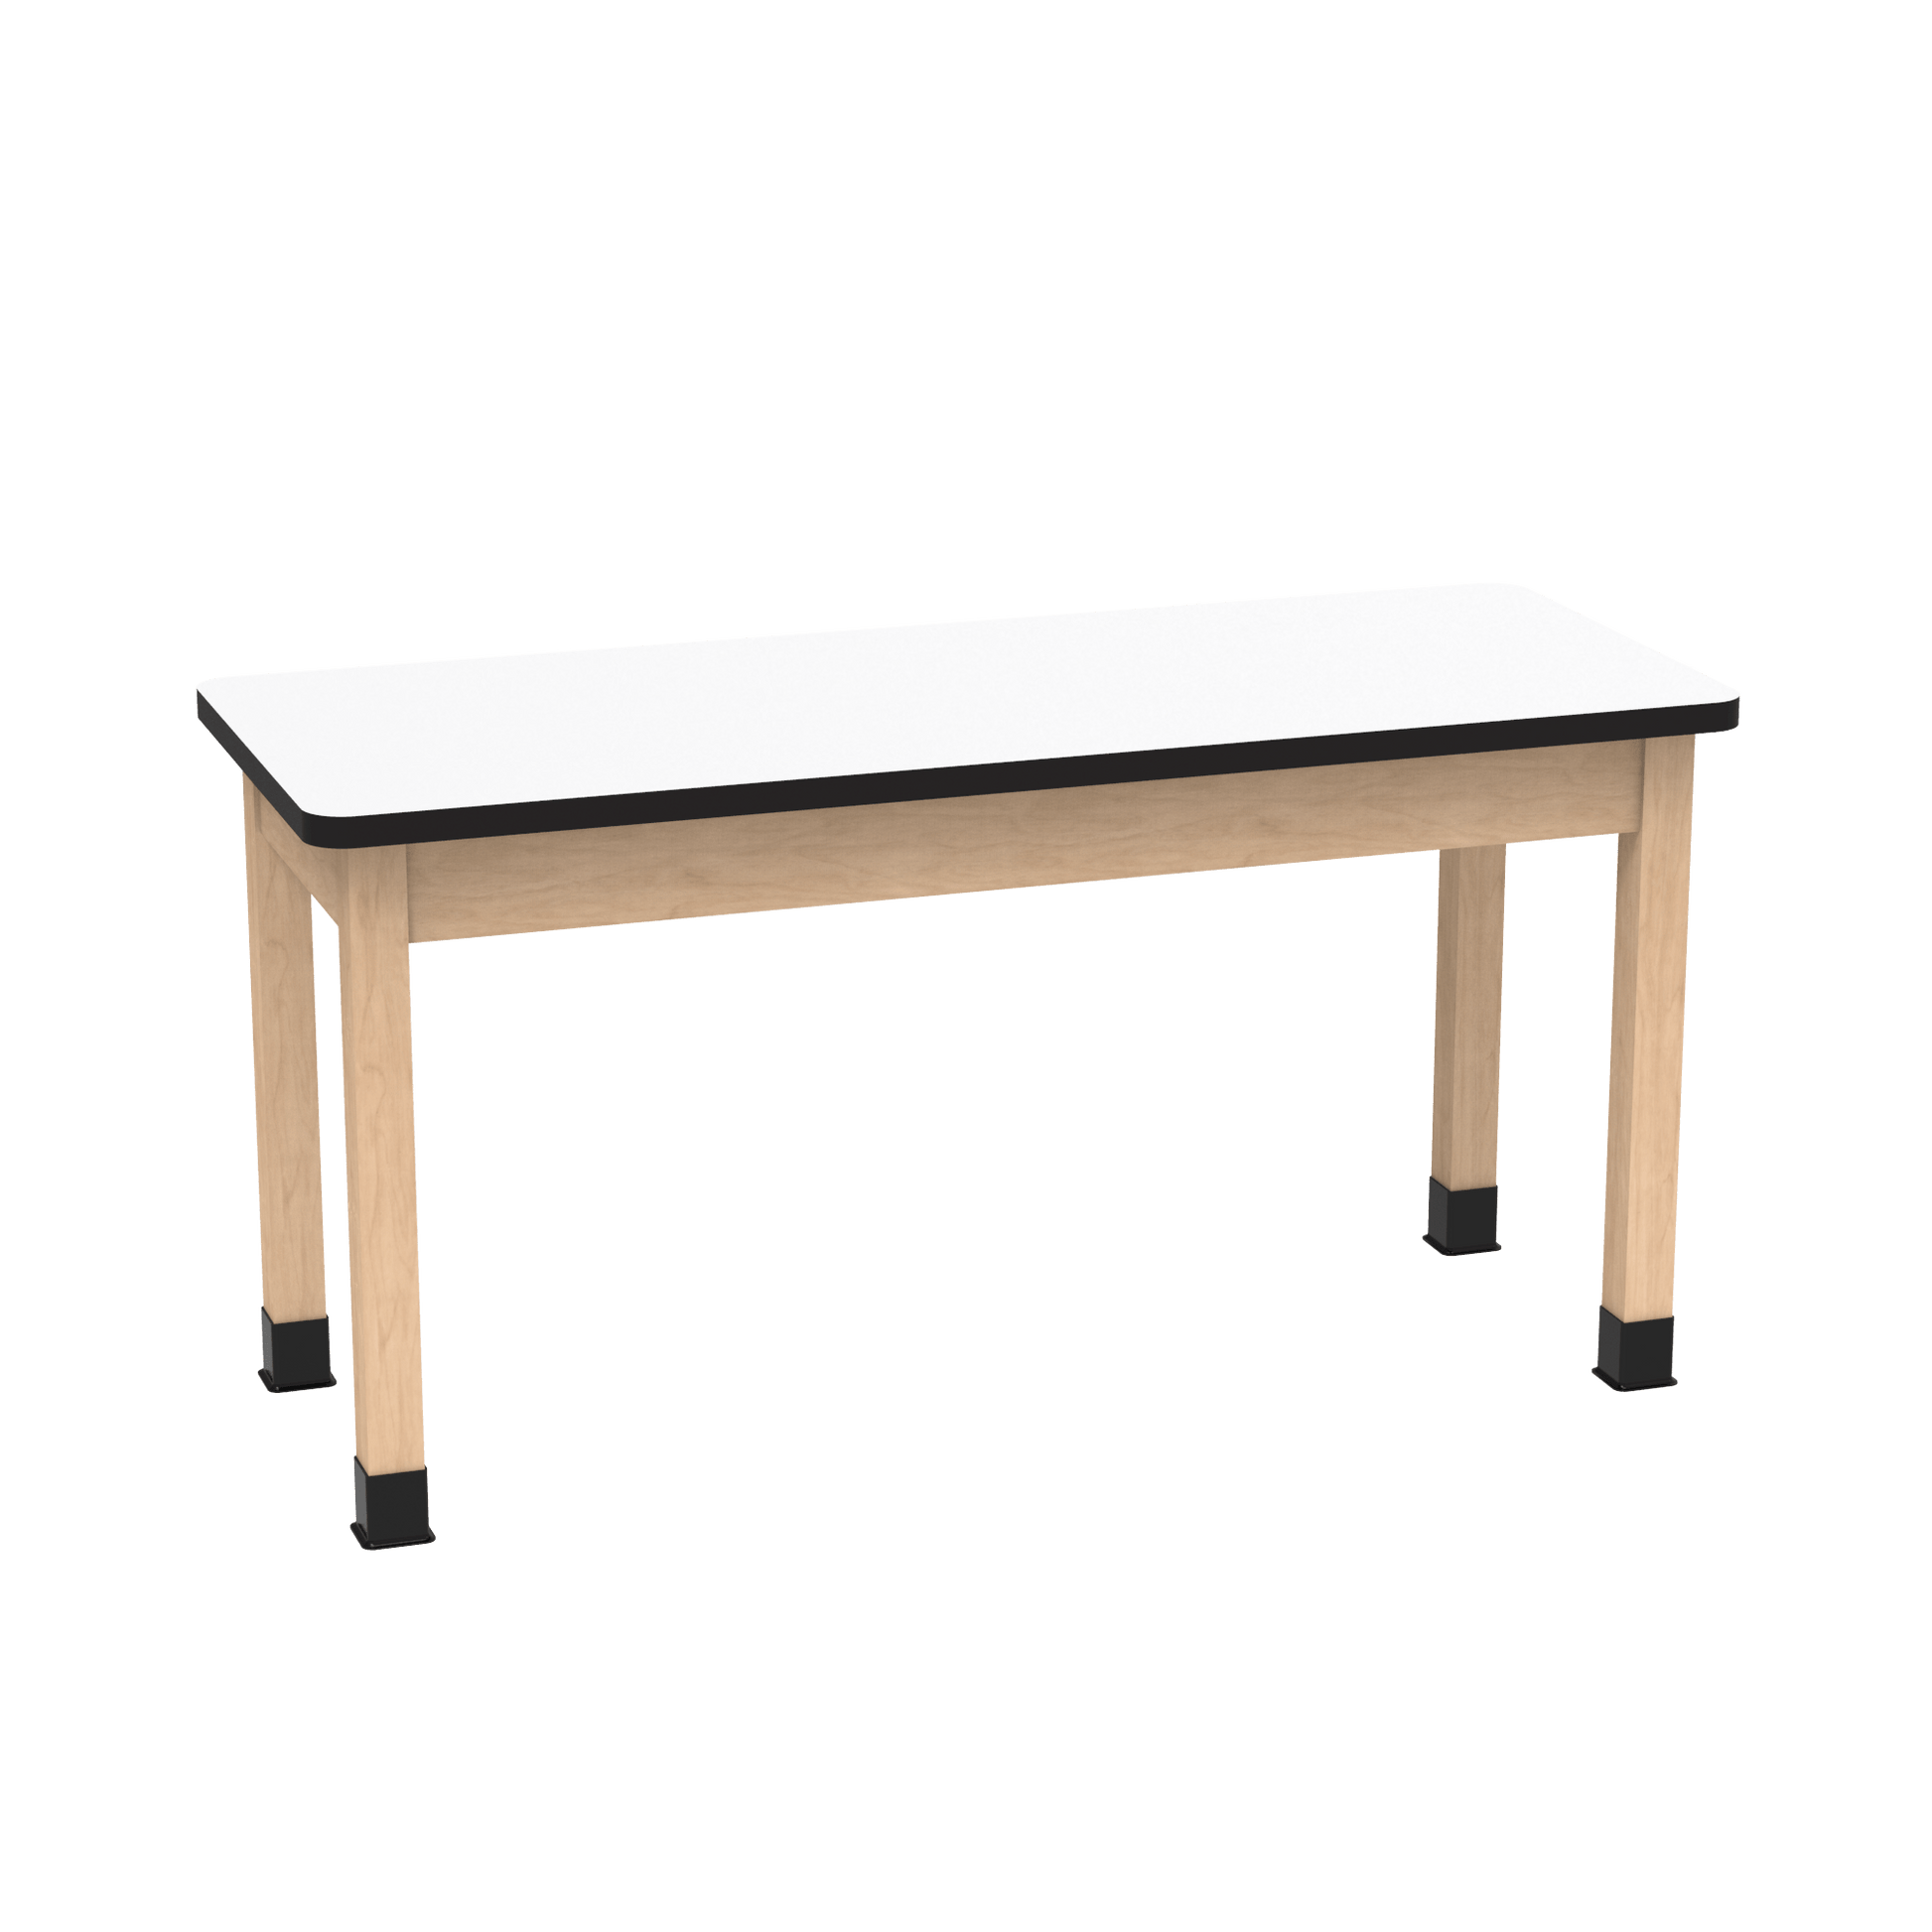 Diversified Woodcrafts Science Table - Plain Apron - 72" W x 24" D - Solid Wood Frame and Adjustable Glides - SchoolOutlet